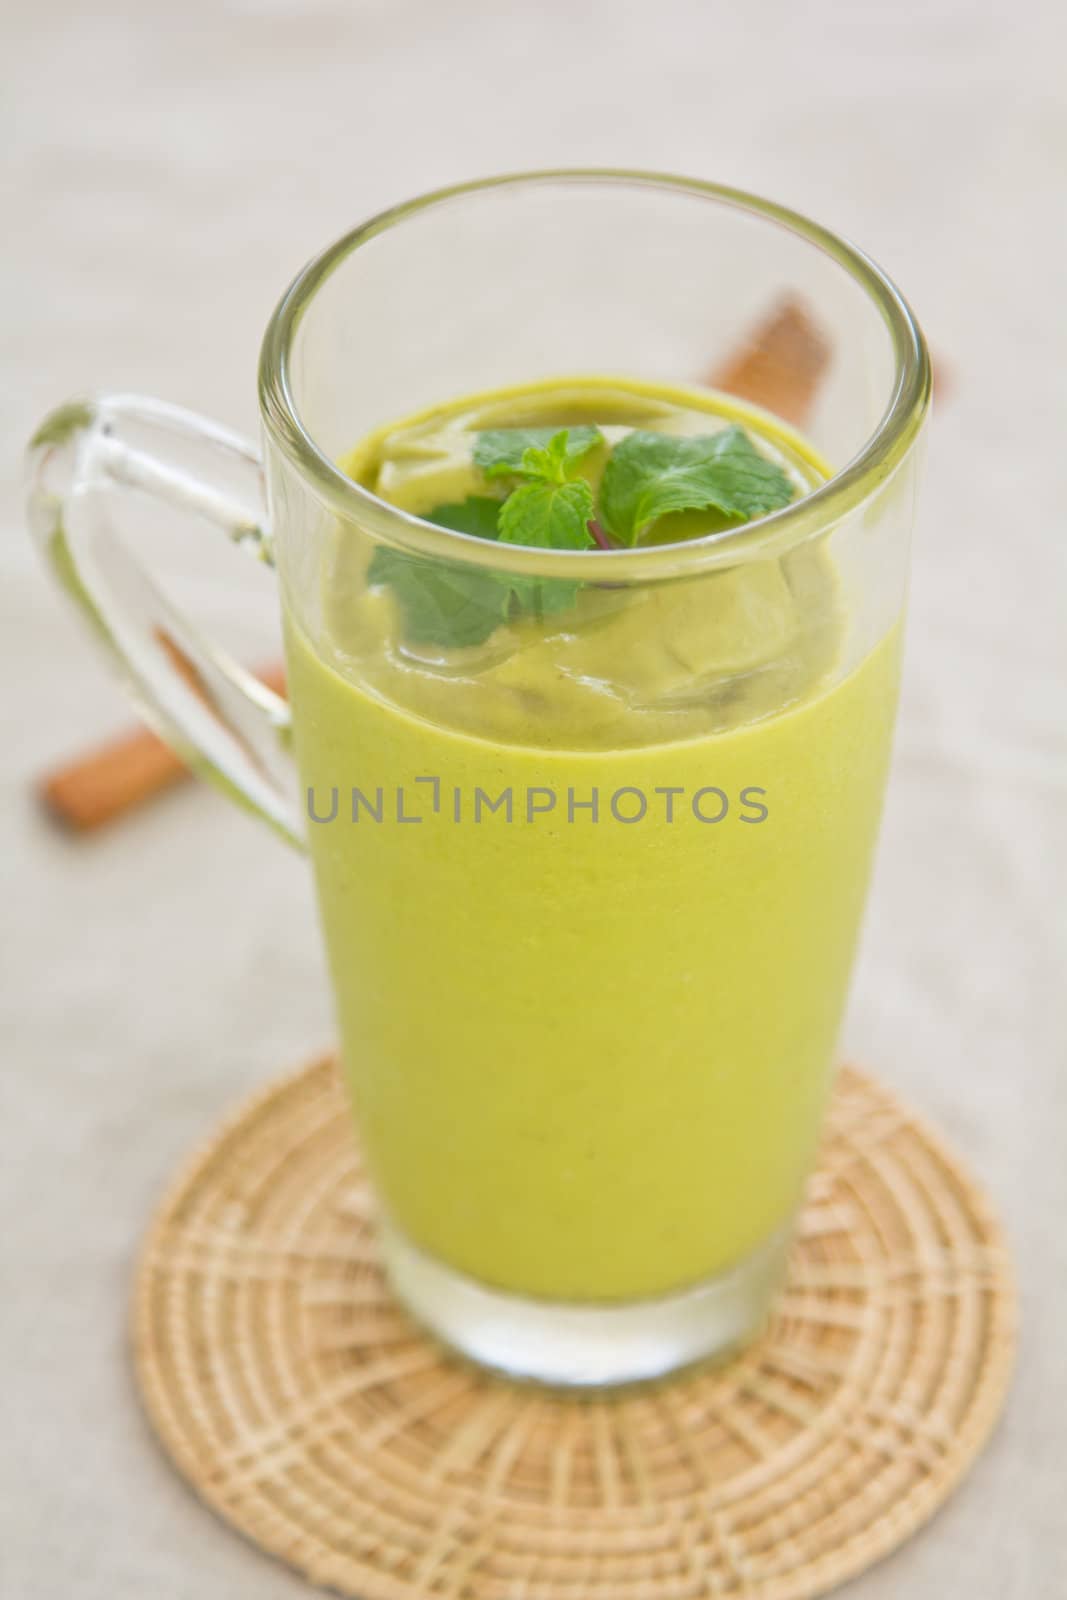 Fresh Avocado smoothie with mint on top